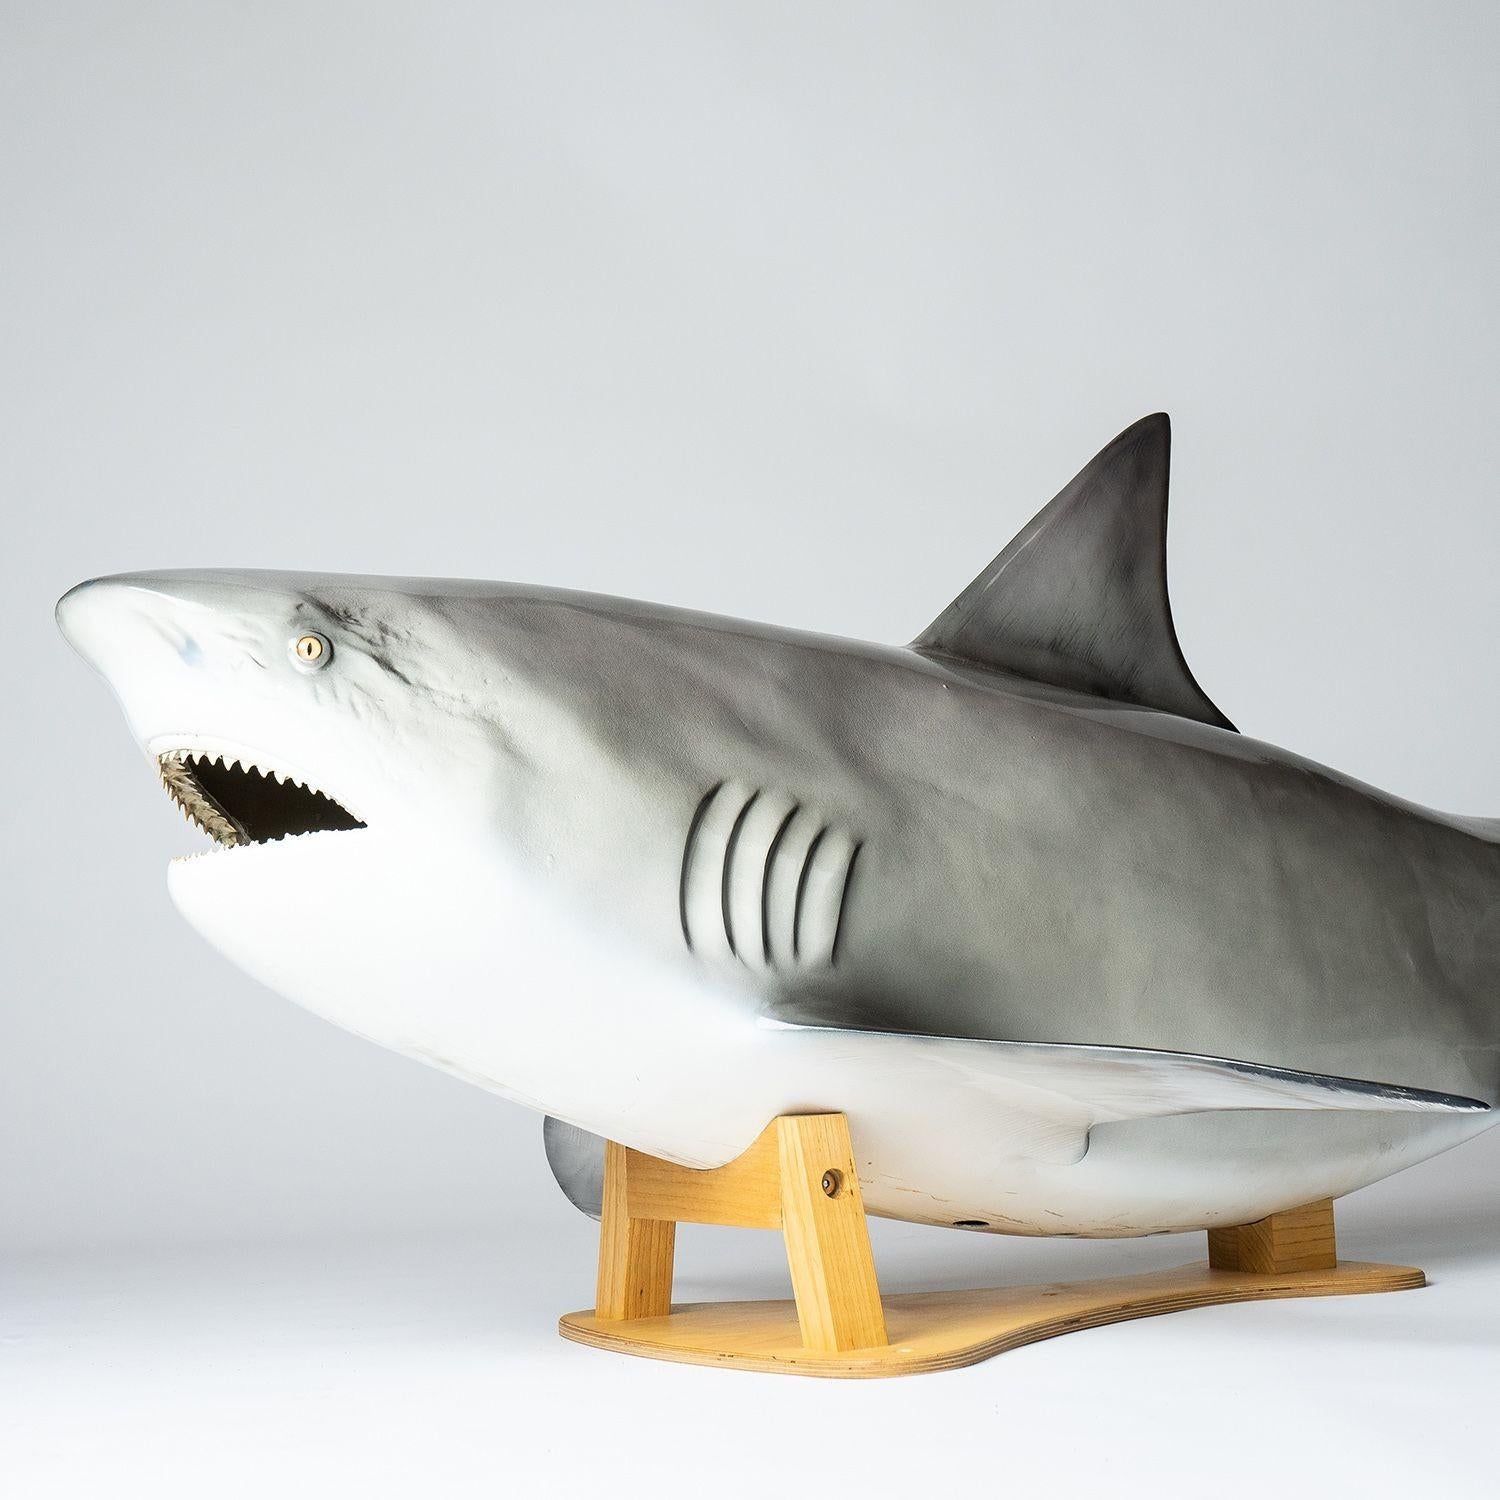 Contemporary Vintage Museum-Quality Life-Size Model of a Bull Shark